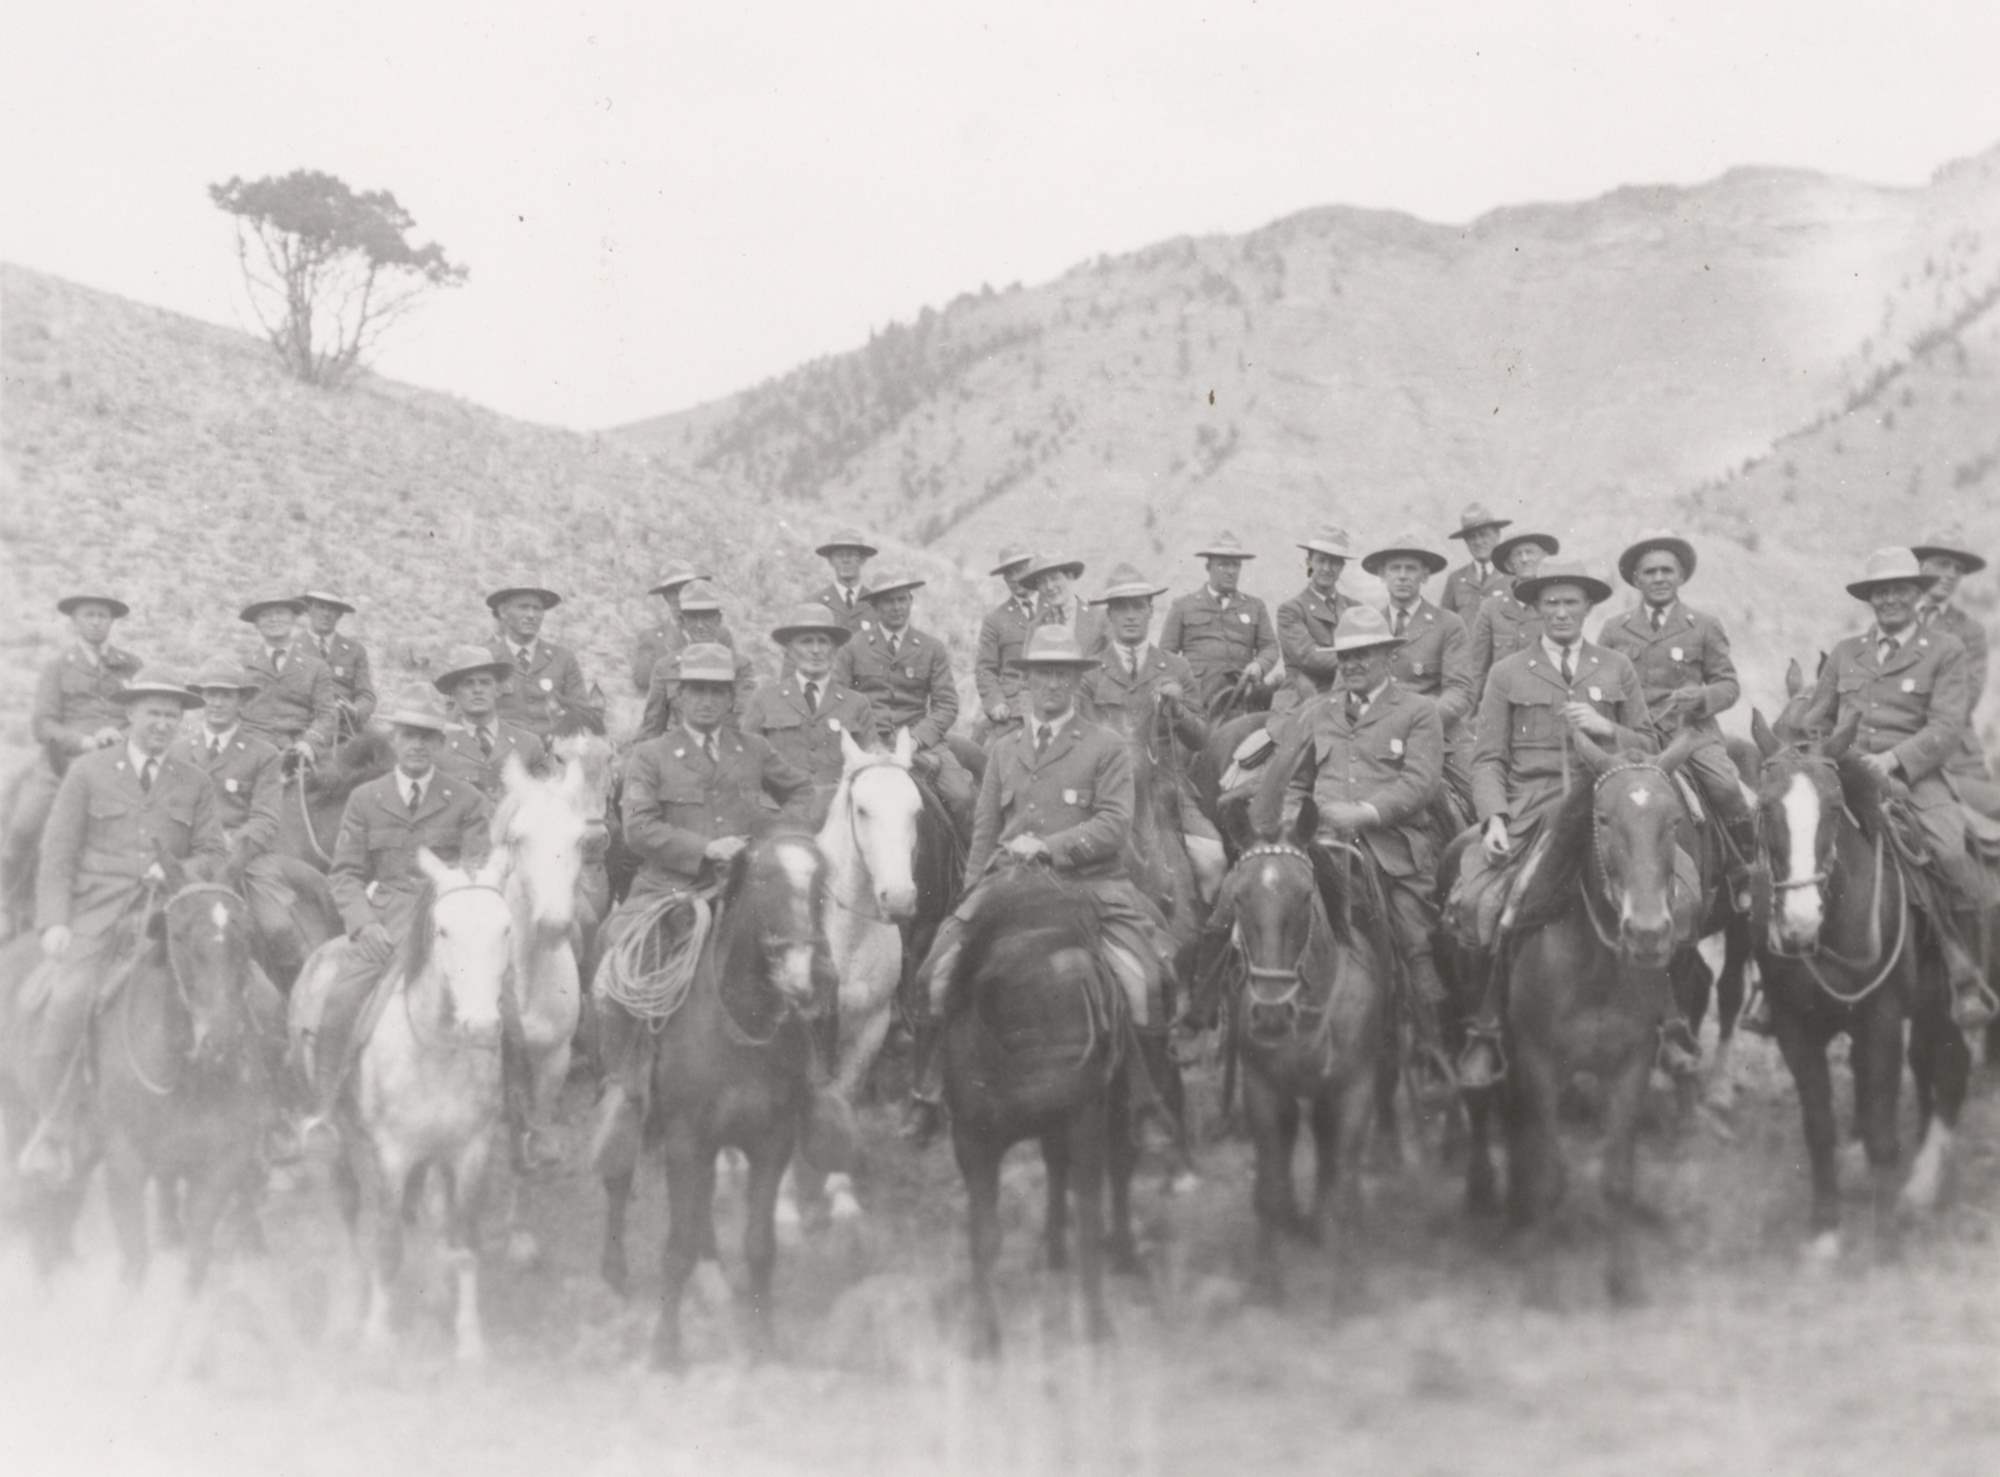 Twenty-seven men and one woman in NPS uniforms and broad brim hats pose on horses. Most wear shield-shaped badges.